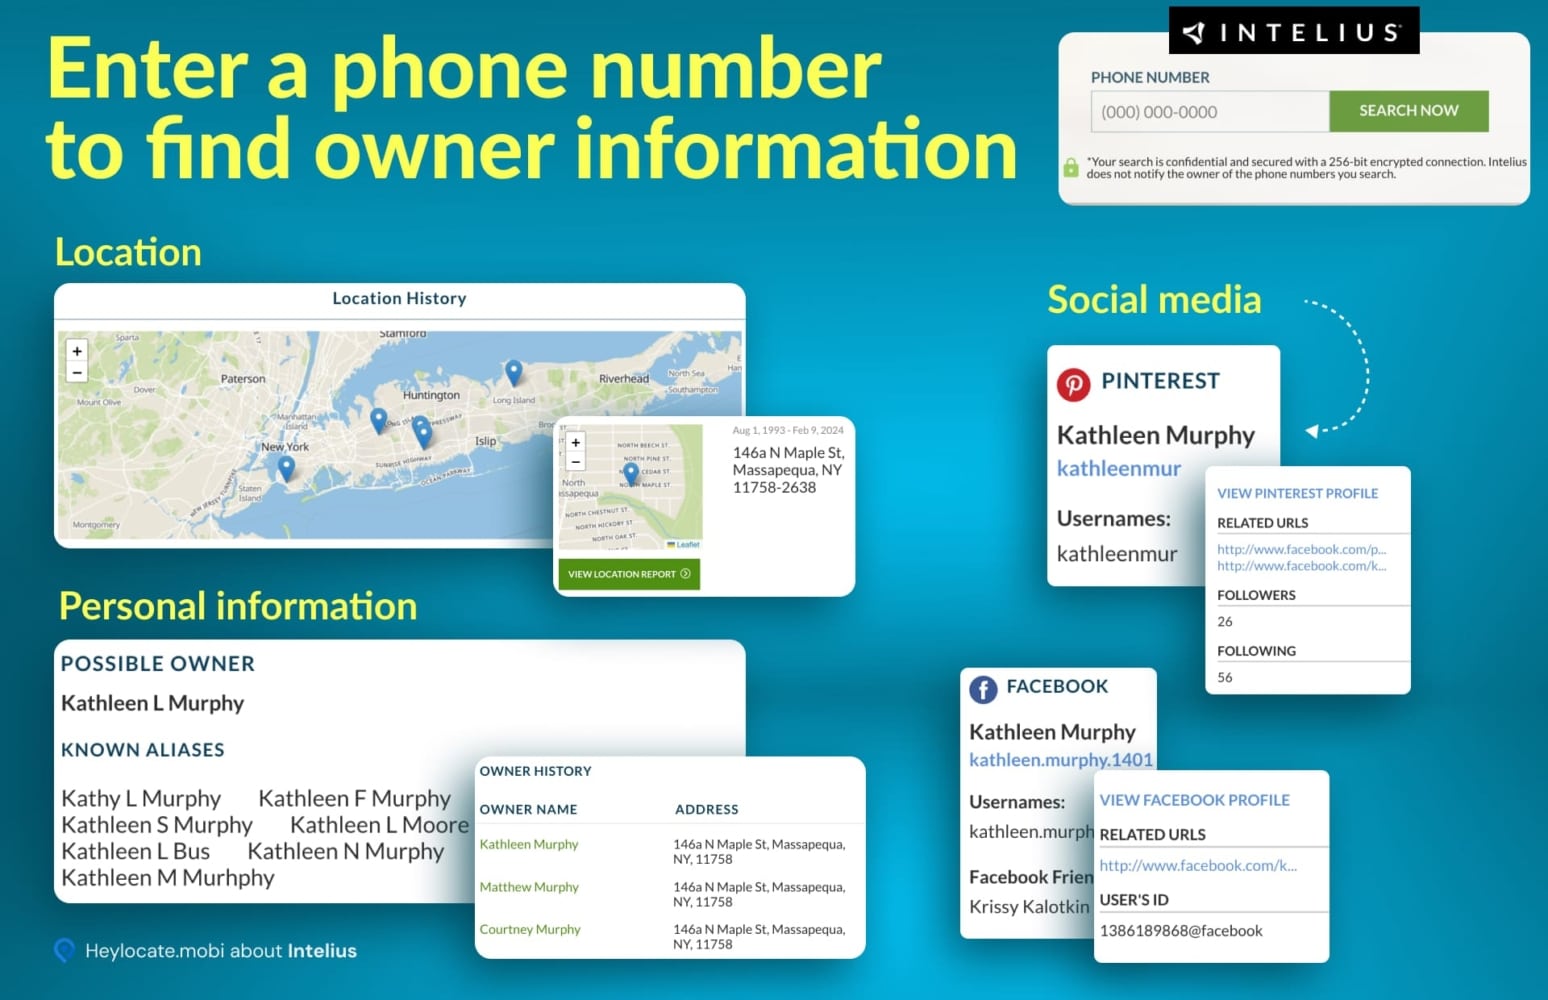 A promotional image for Intelius services showing how to obtain various details about a person by entering their phone number. It includes a location history map, personal information with known aliases and owner history, and social media profiles related to the individual.